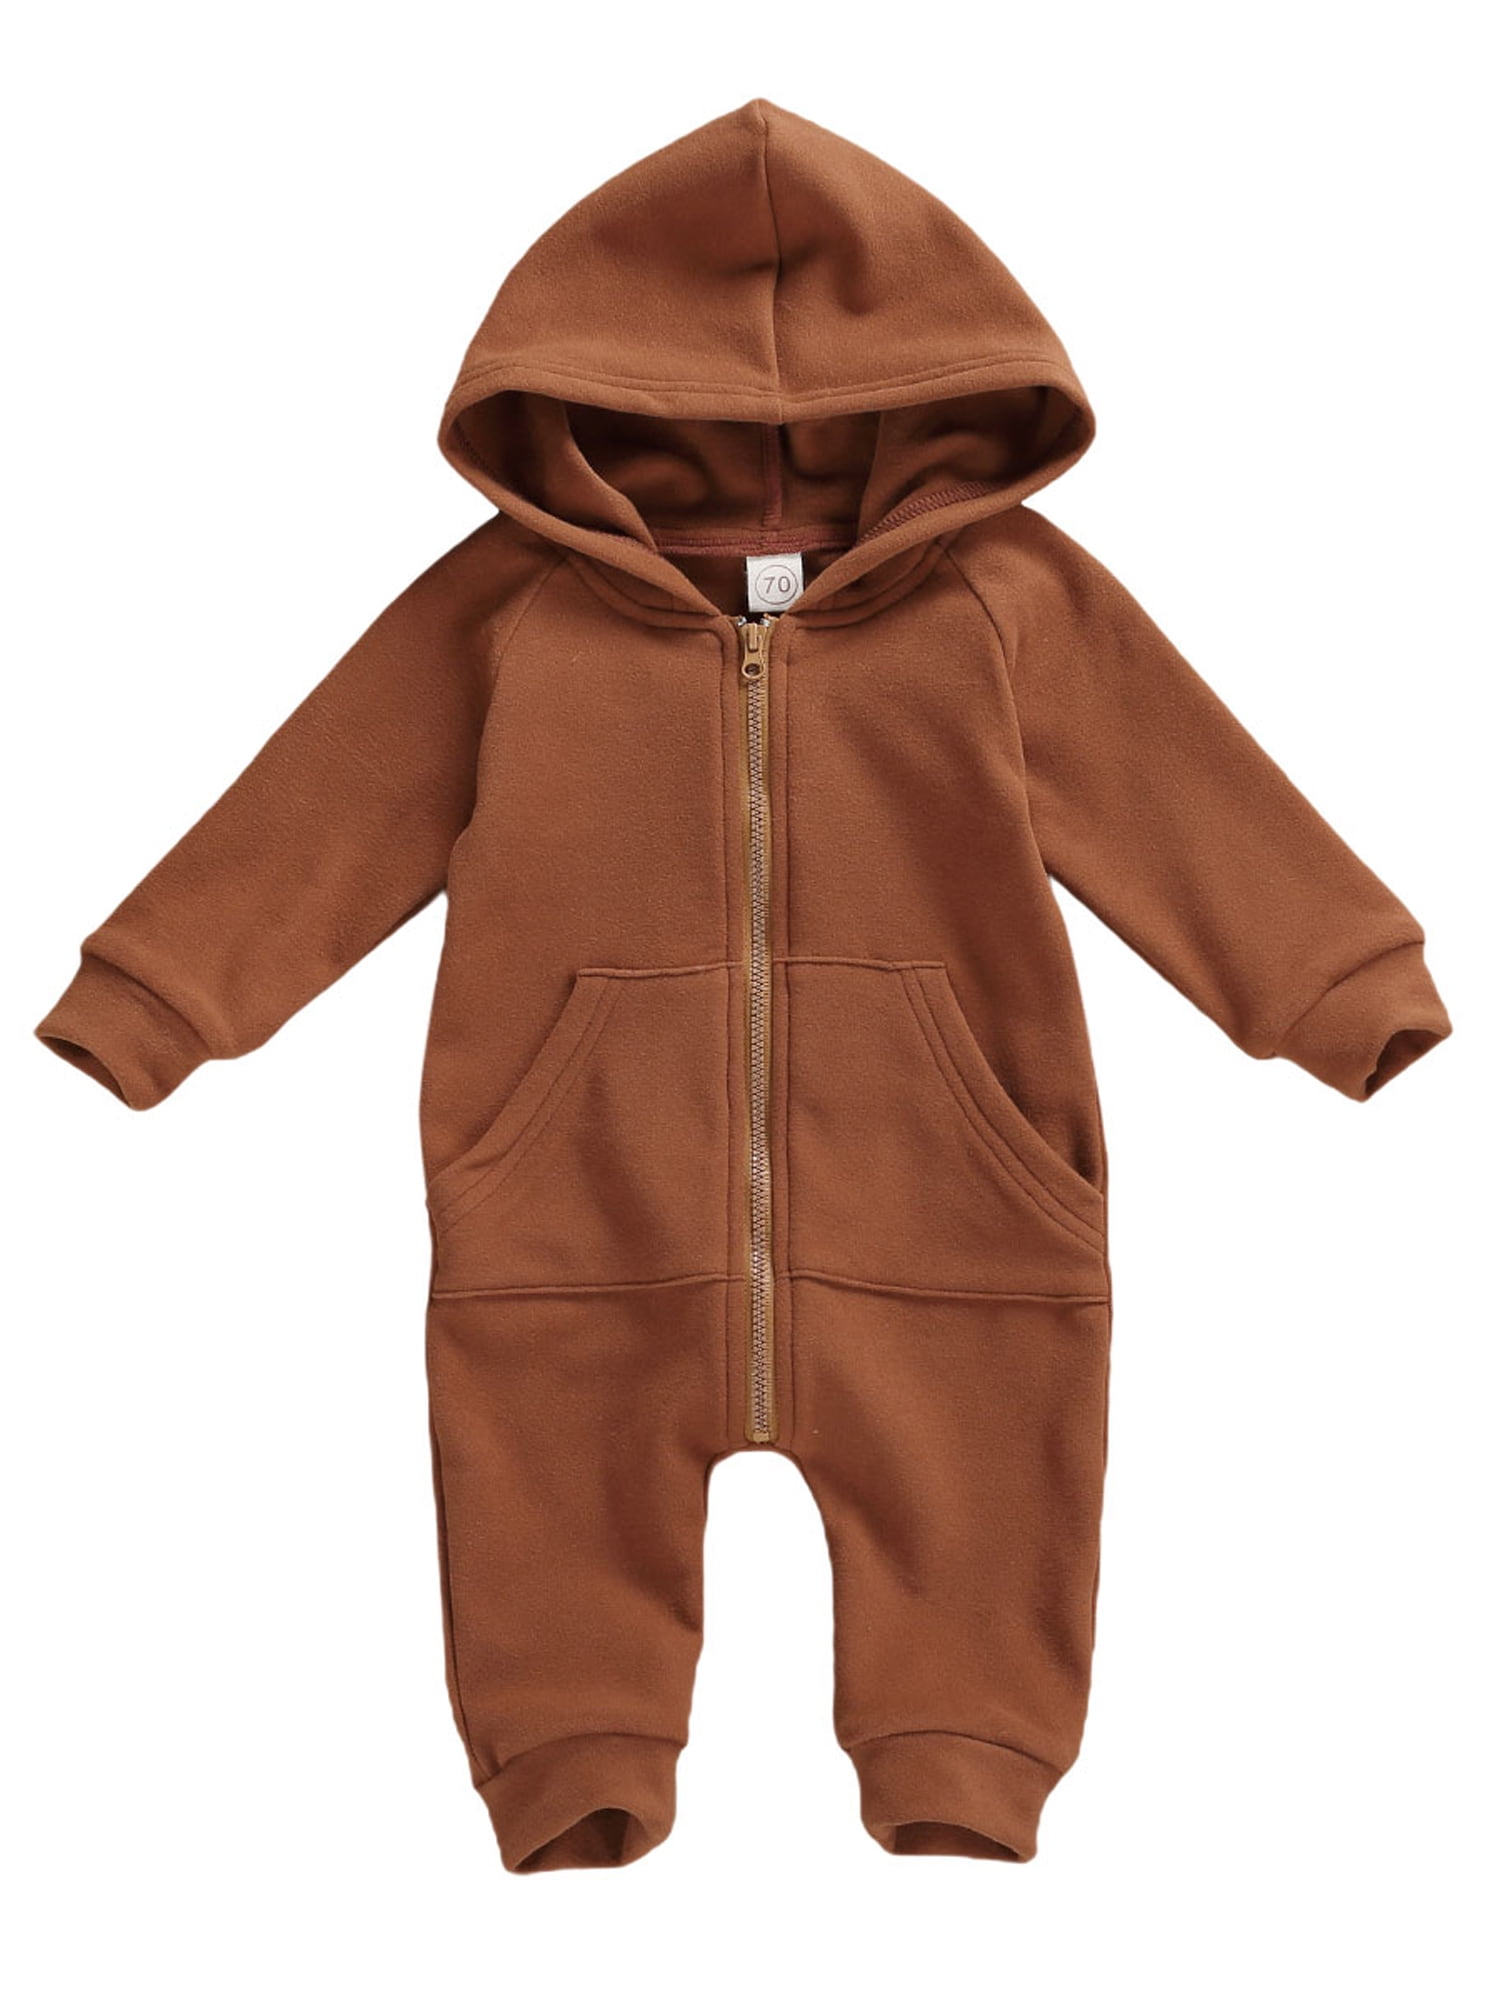 Bear Friends Hooded Suit Baby all in one outfit long sleeve NB 0-3 3-6 mths 